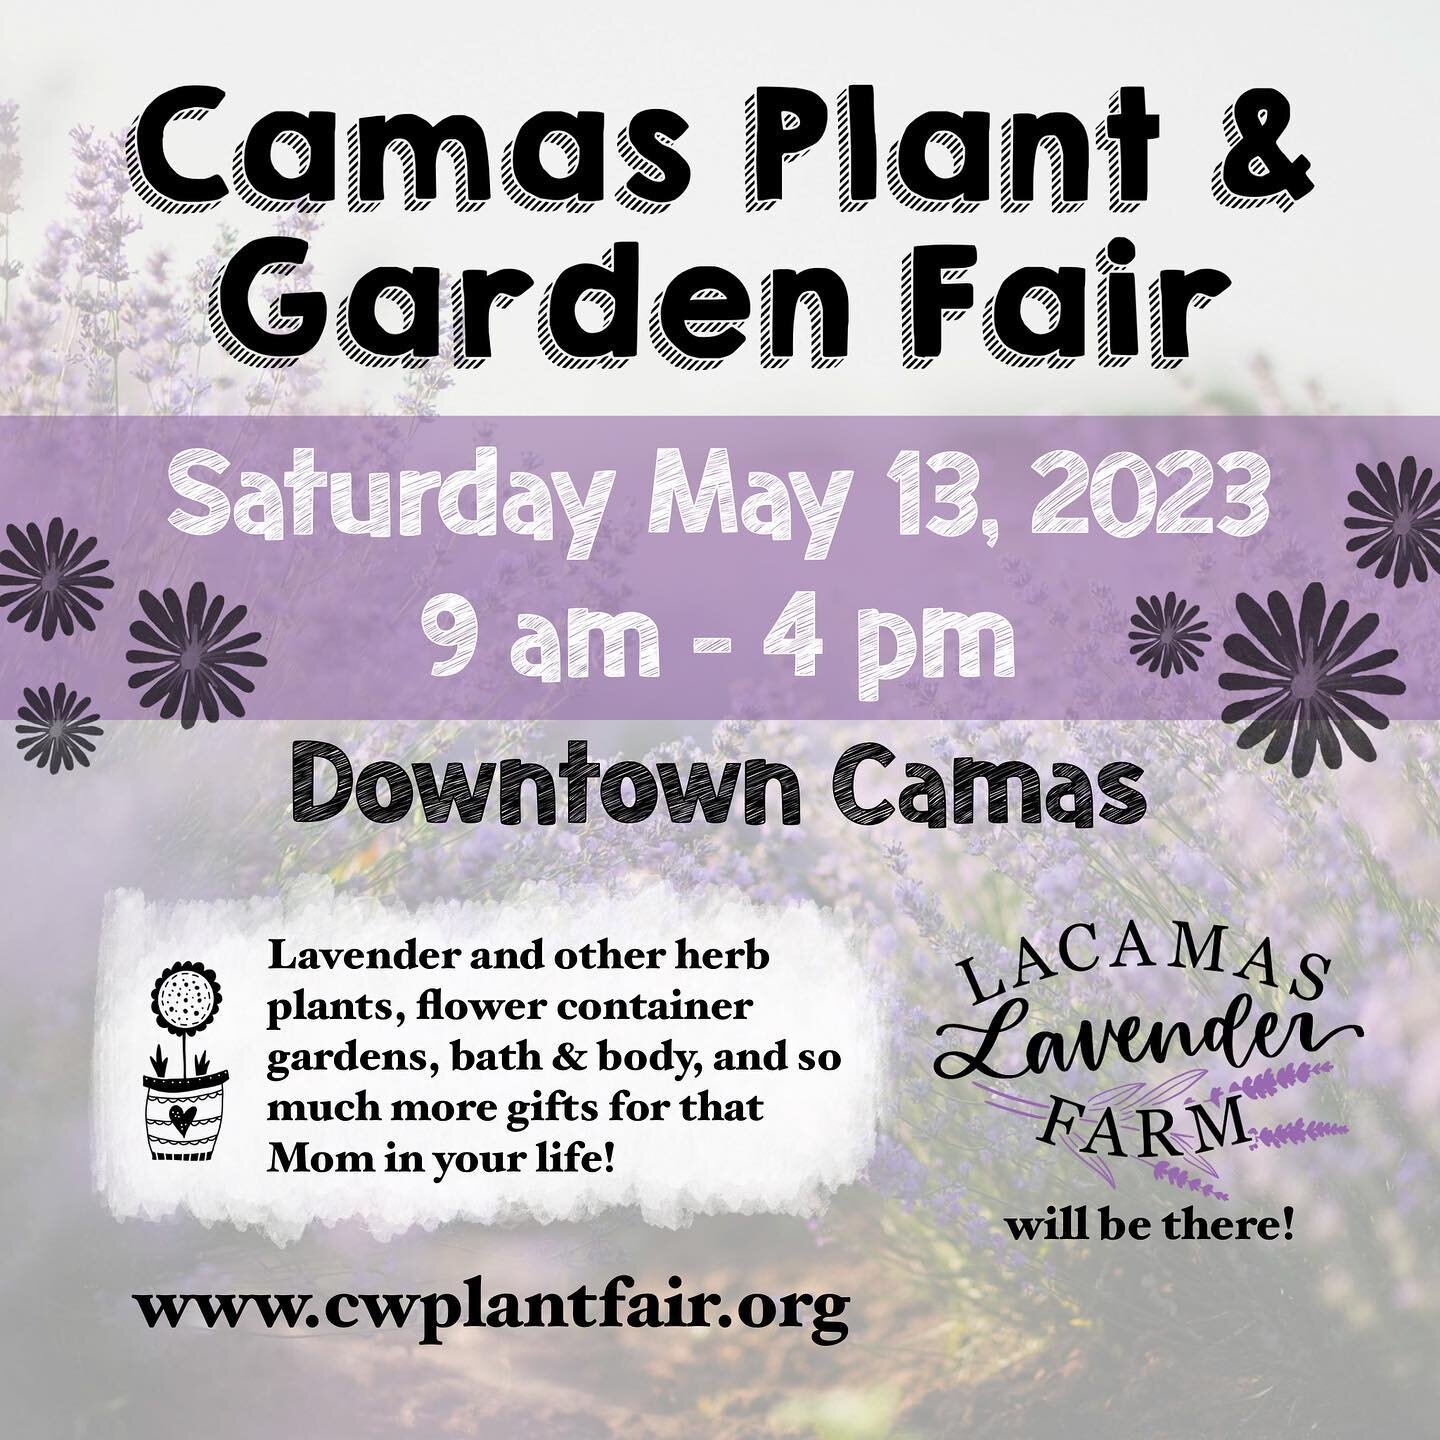 We&rsquo;re 6️⃣ days away from the Camas Plant and Garden Fair!!!
This week we&rsquo;ll be sharing all the lovely things we&rsquo;re bringing to the sale, so be sure to stay tuned in on our socials!
#lacamaslavenderfarm 
&bull; &bull; &bull; 
#camasp